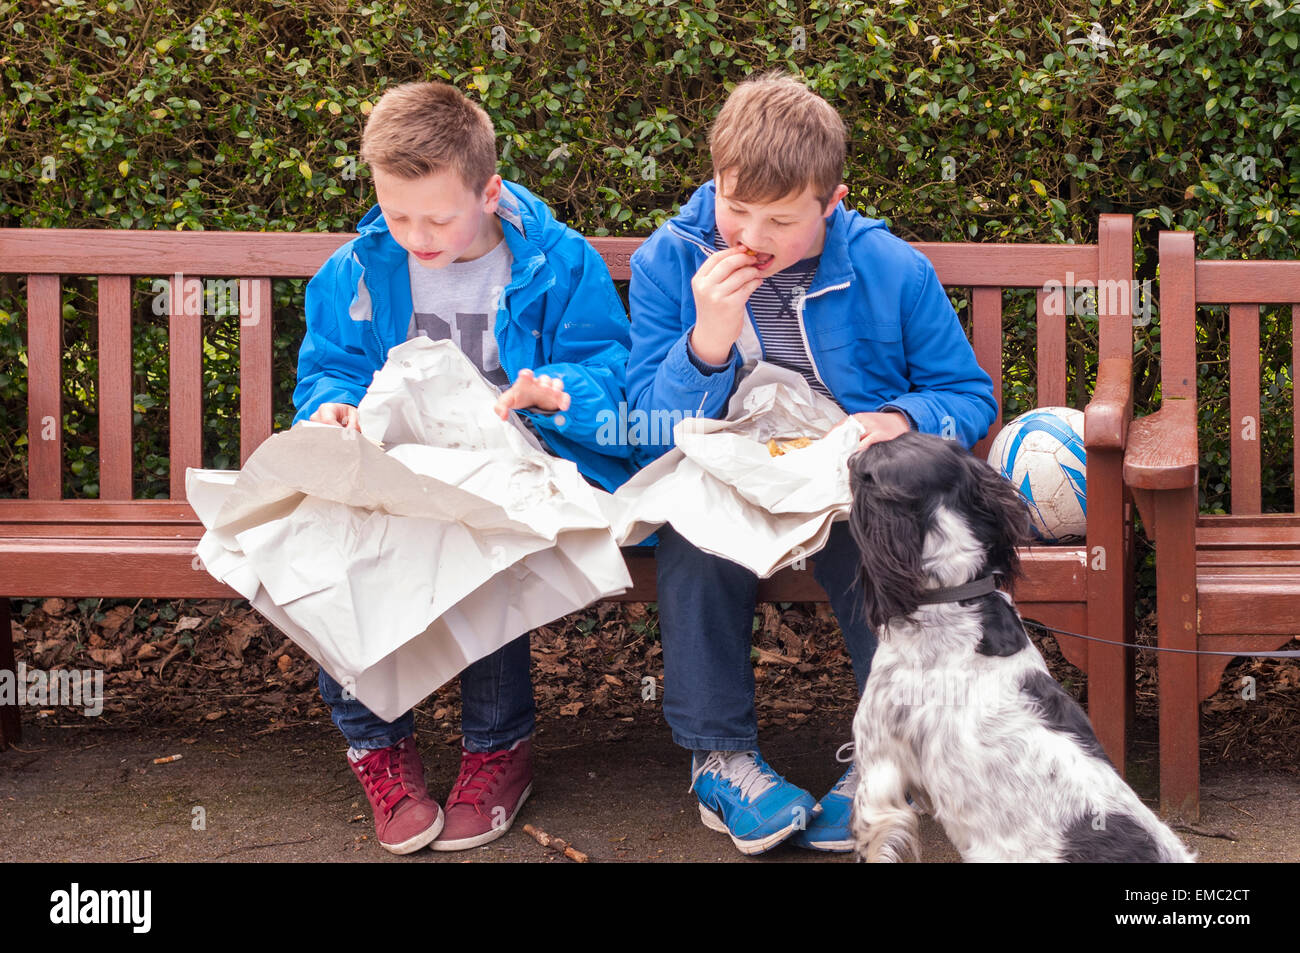 two-boys-eating-fish-chips-on-a-park-bench-in-the-uk-EMC2CT.jpg